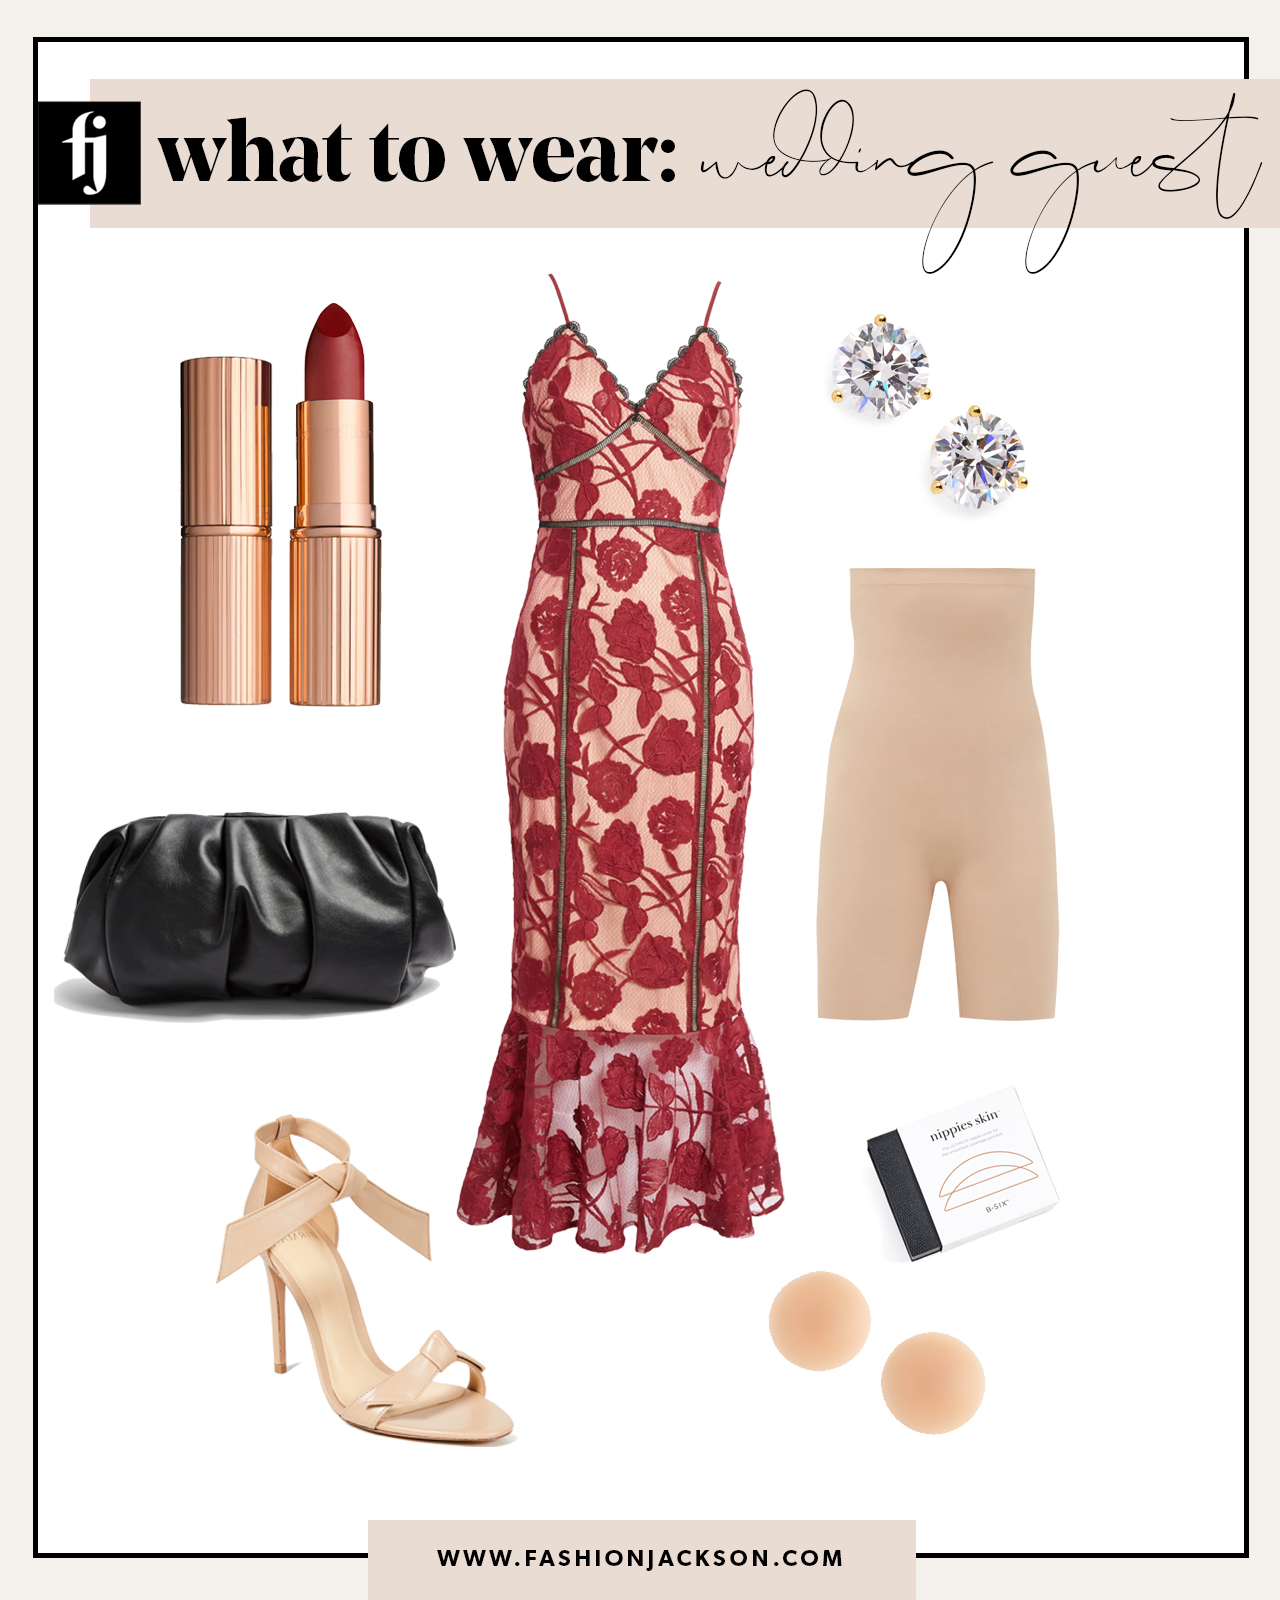 wedding guest outfit 3